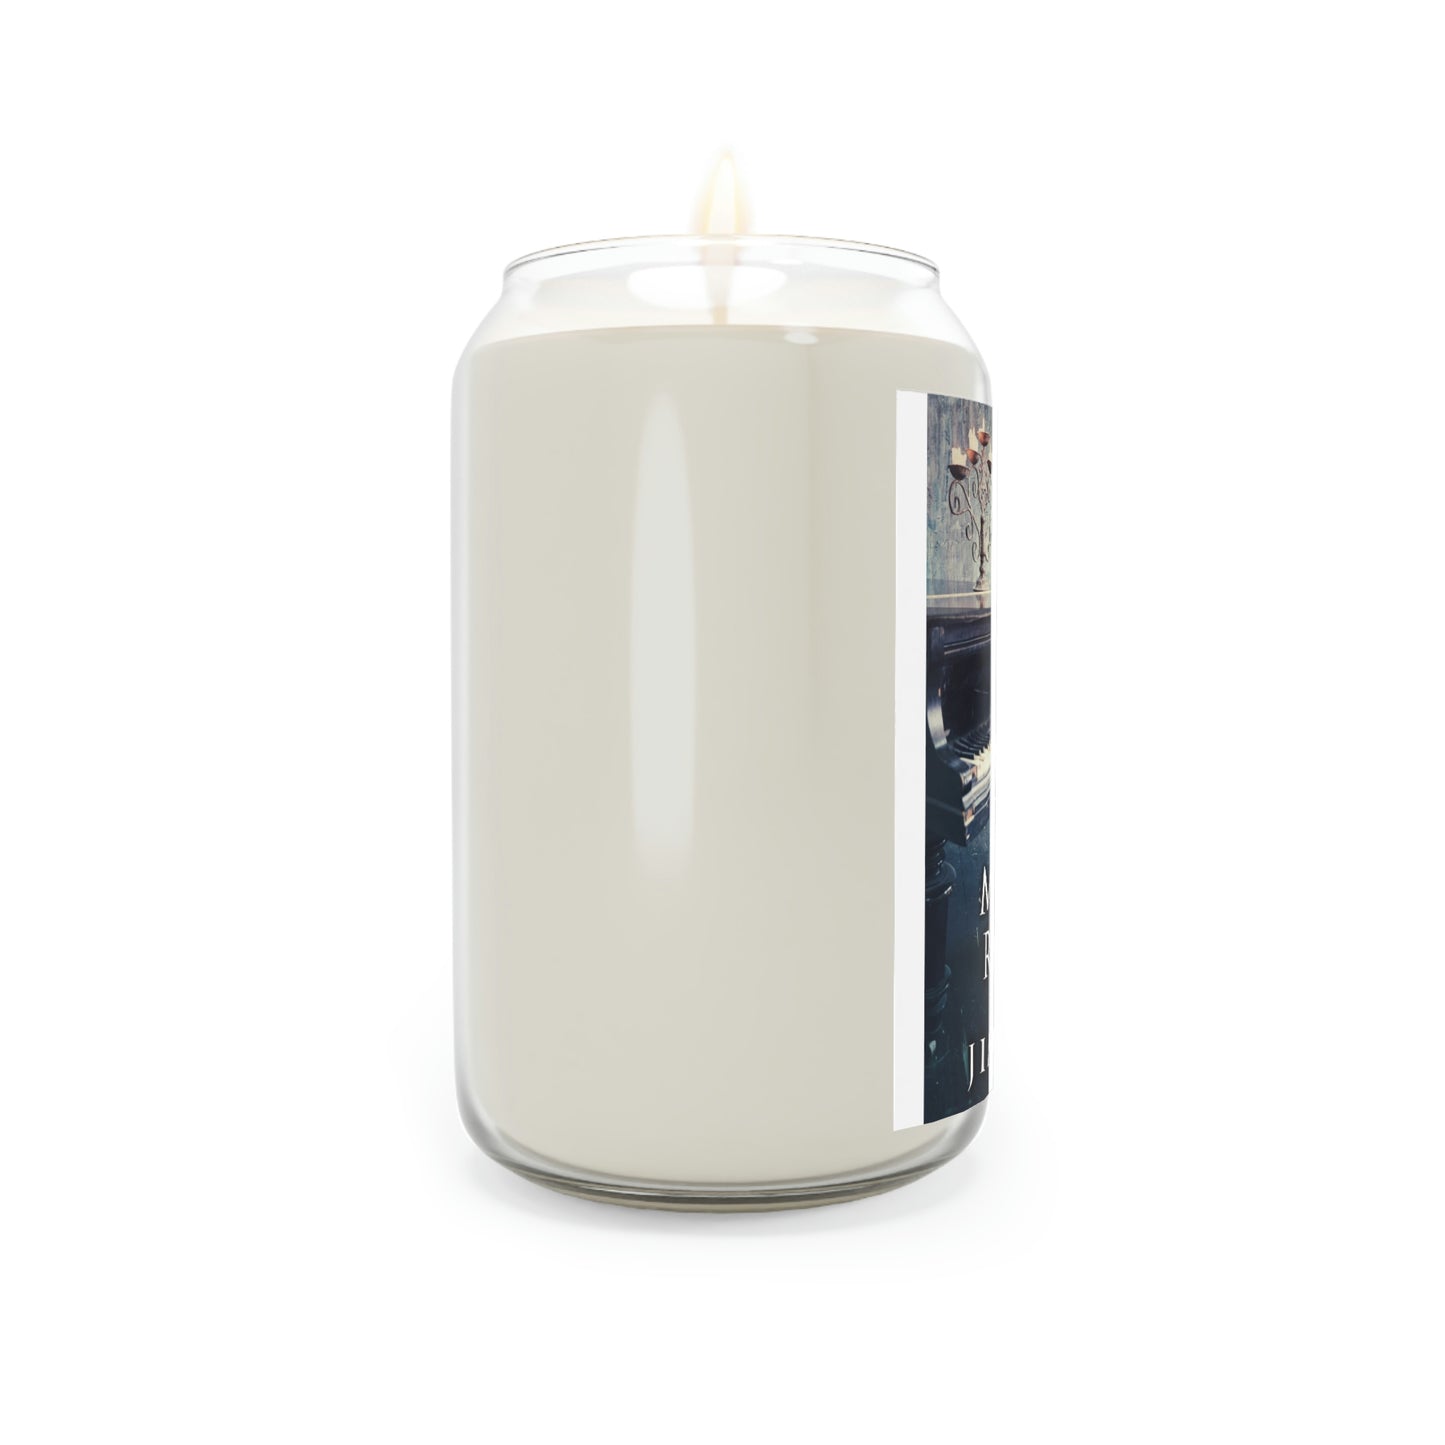 The Music Room - Scented Candle